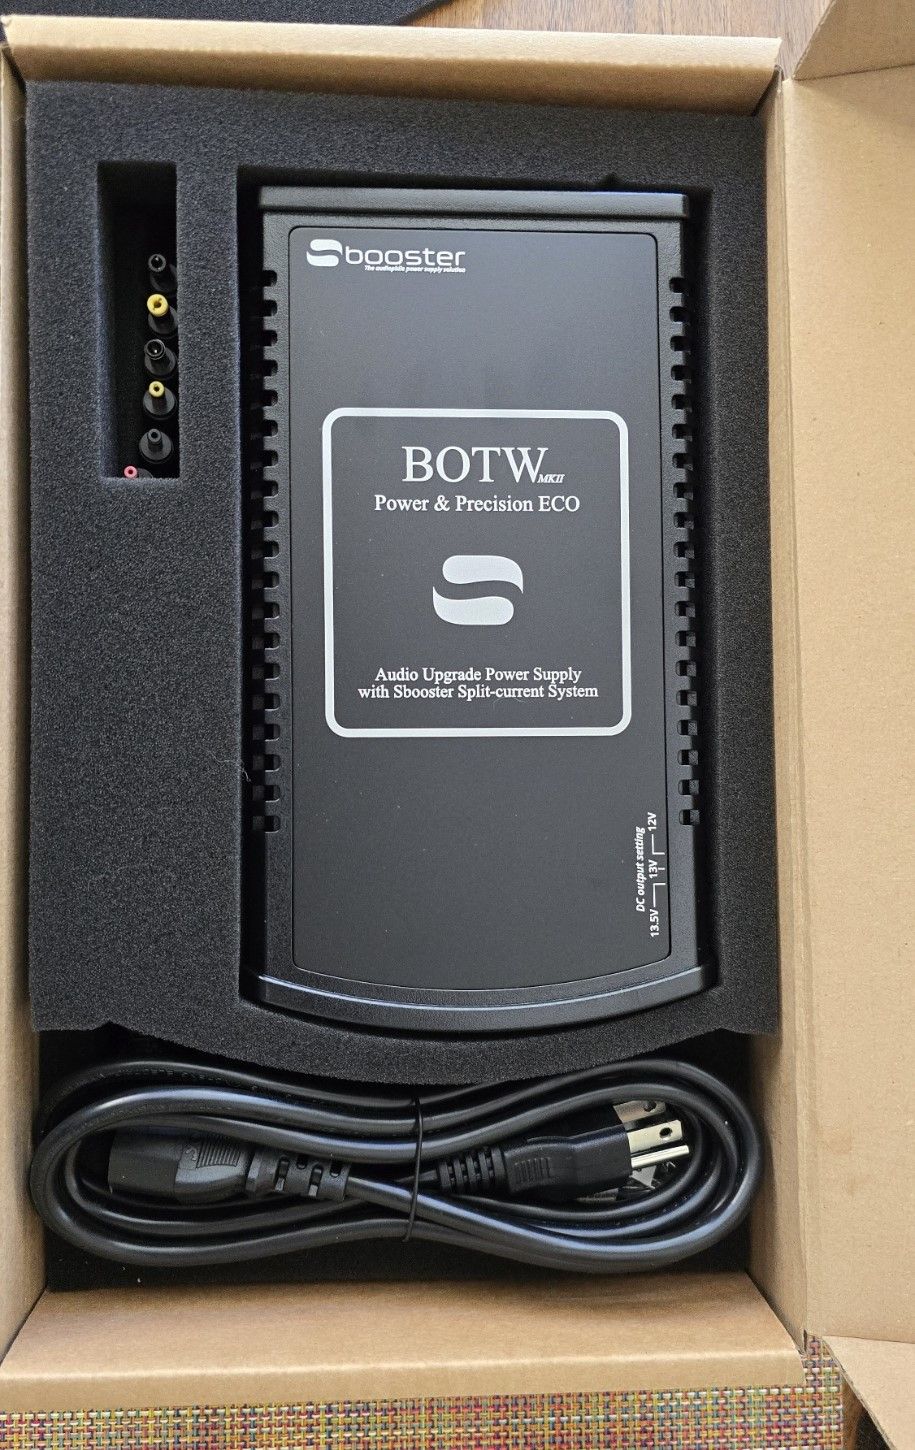 Brand New : Sbooster BOTW P&P ECO MKII Power Supply (12... 3